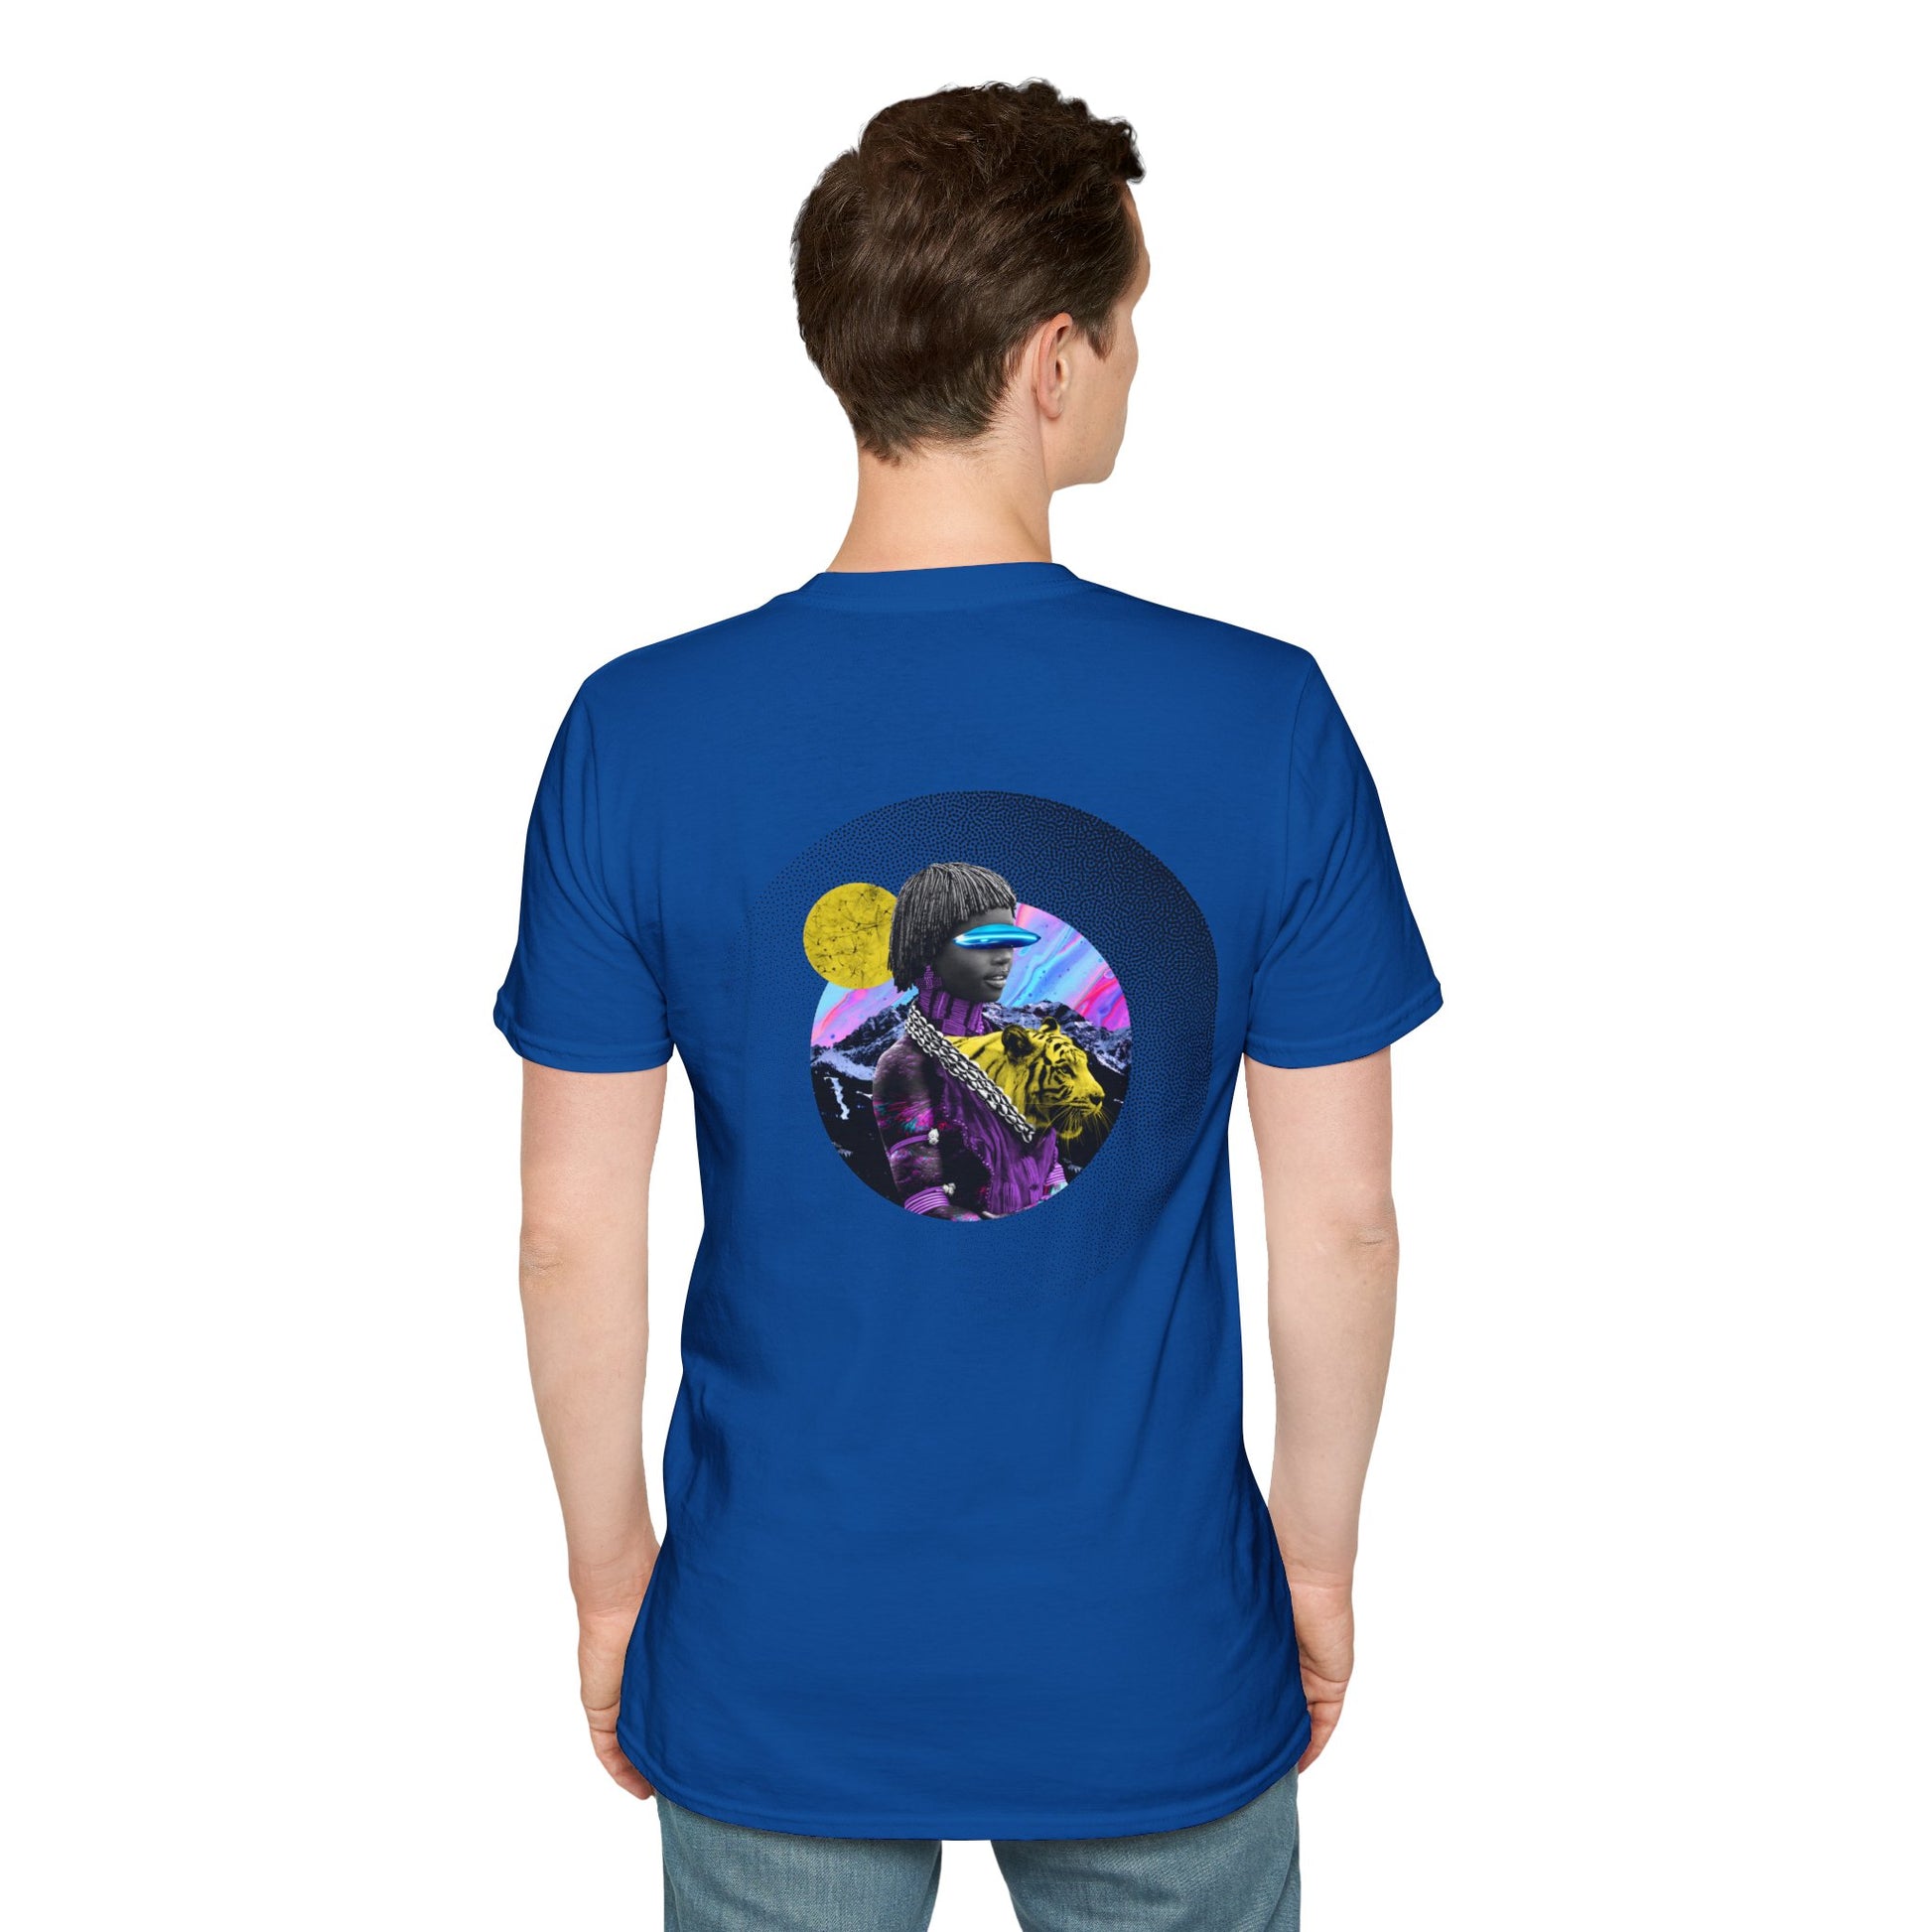 Blue T-shirt with a collage of an African woman with futuristic glasses and a yellow tiger